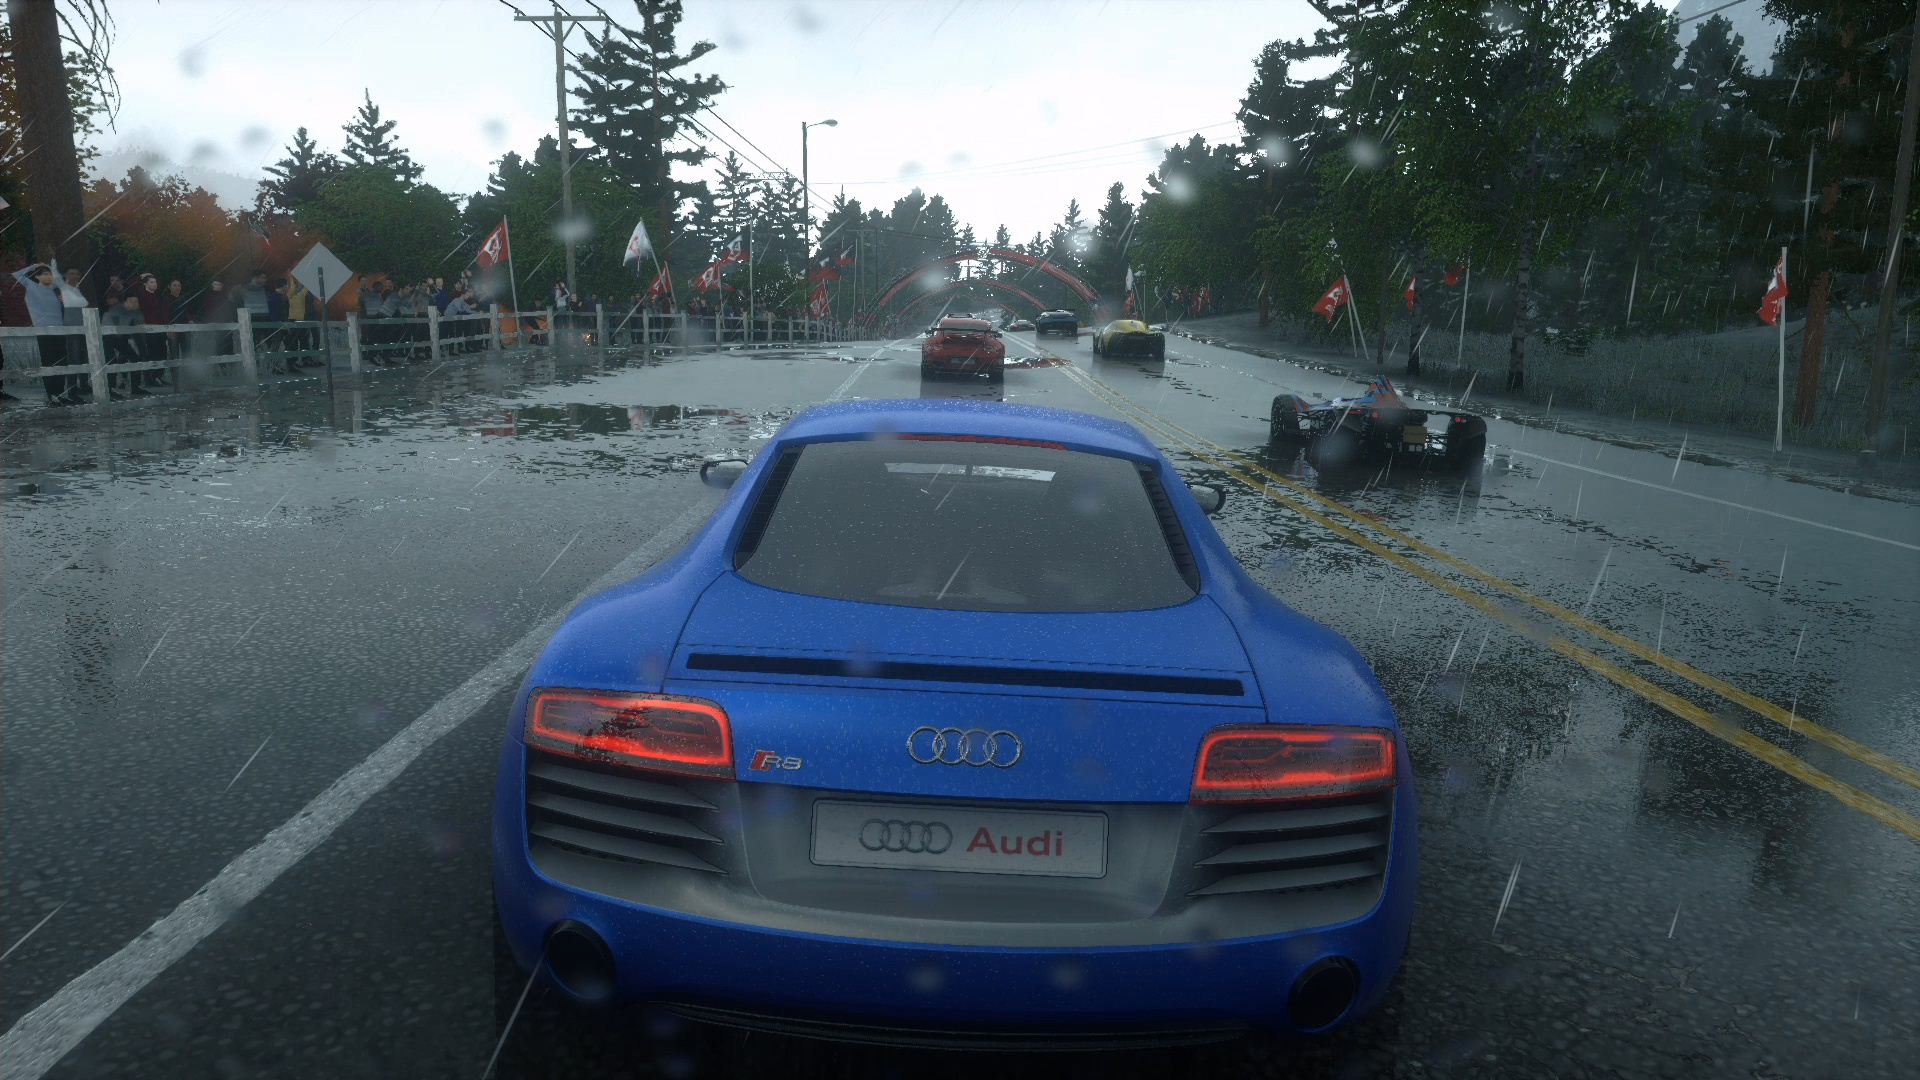 Muslo padre ayer DriveClub Was an Underrated Gem, and Needs to be Patched for the PS5